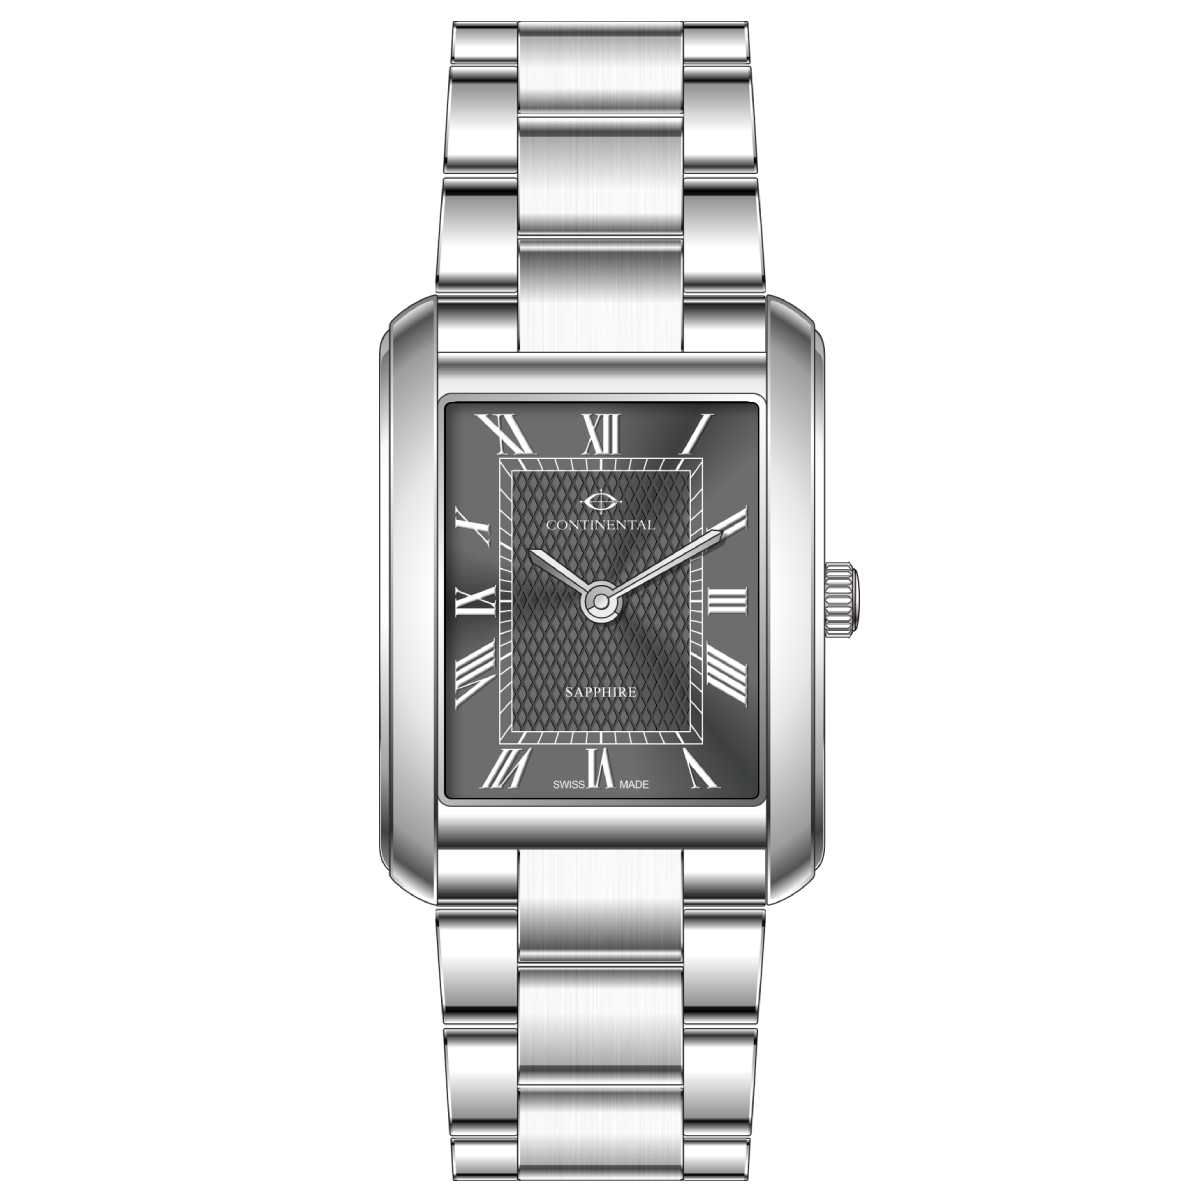 Continental Ladies Dress Watch 22509-LT101660 - front view